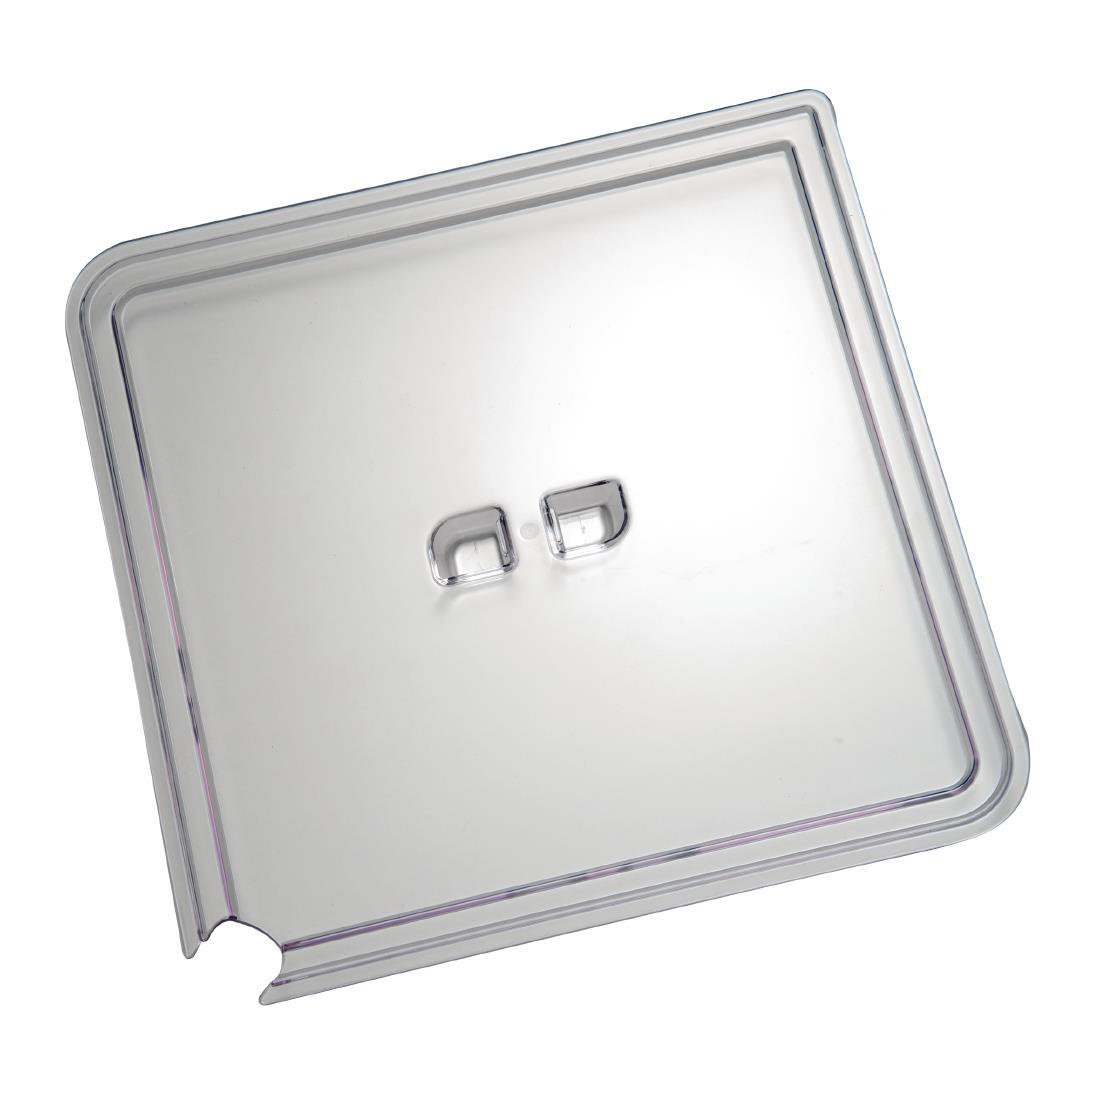 APS Counter System Lid for 290x 290mm Bowls - Each - GH437 - 1